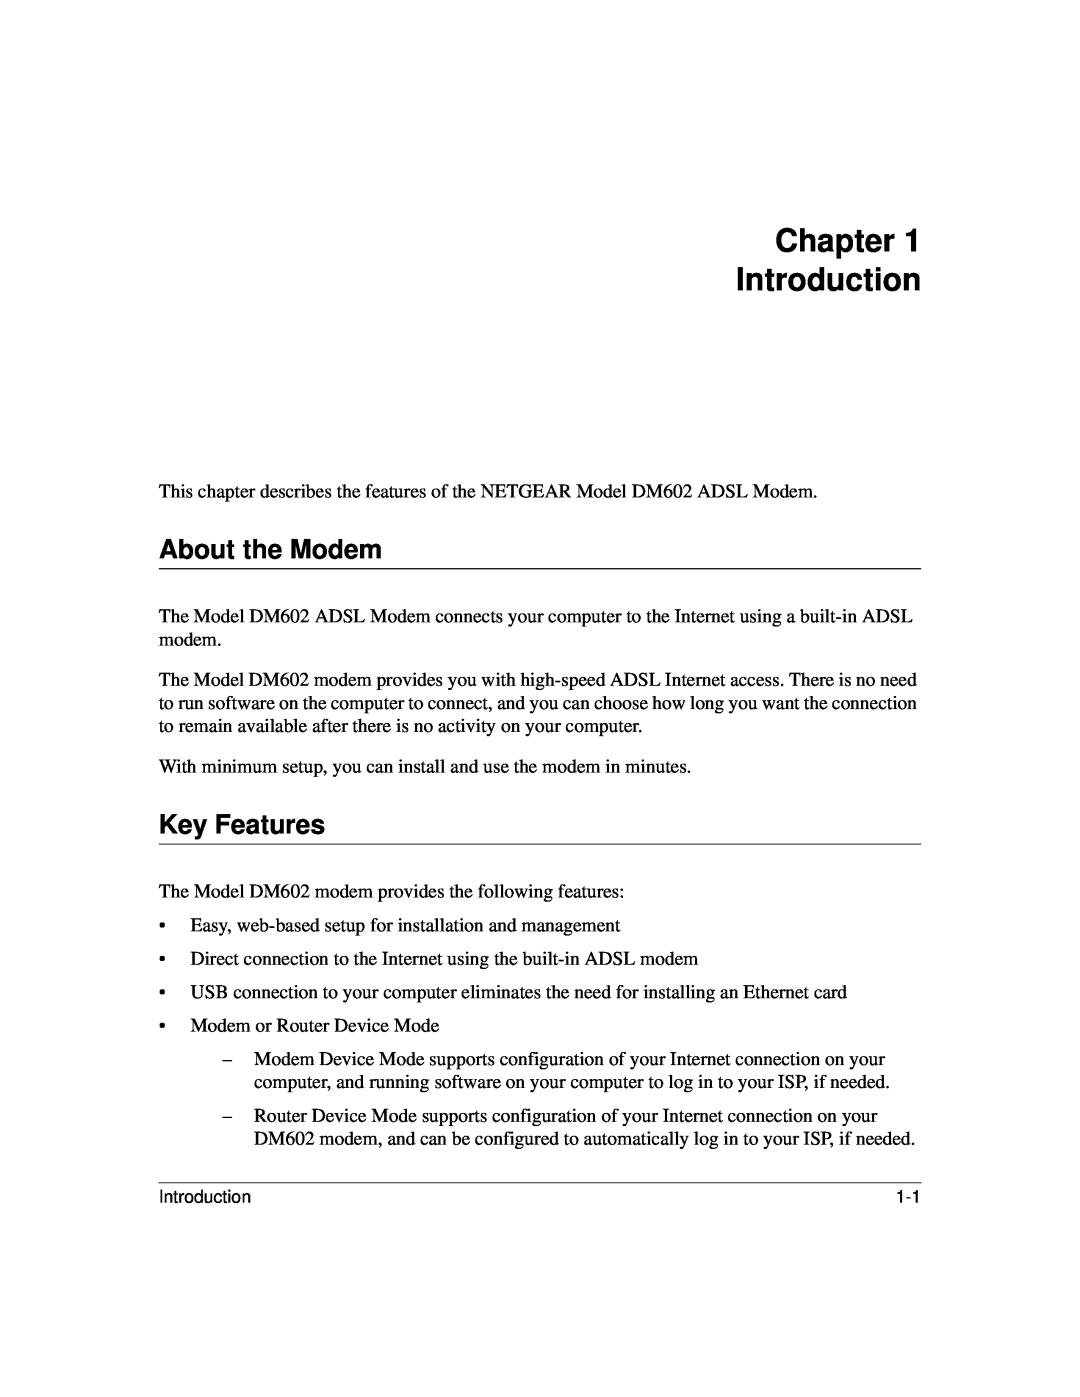 NETGEAR DM602 manual Chapter Introduction, About the Modem, Key Features 